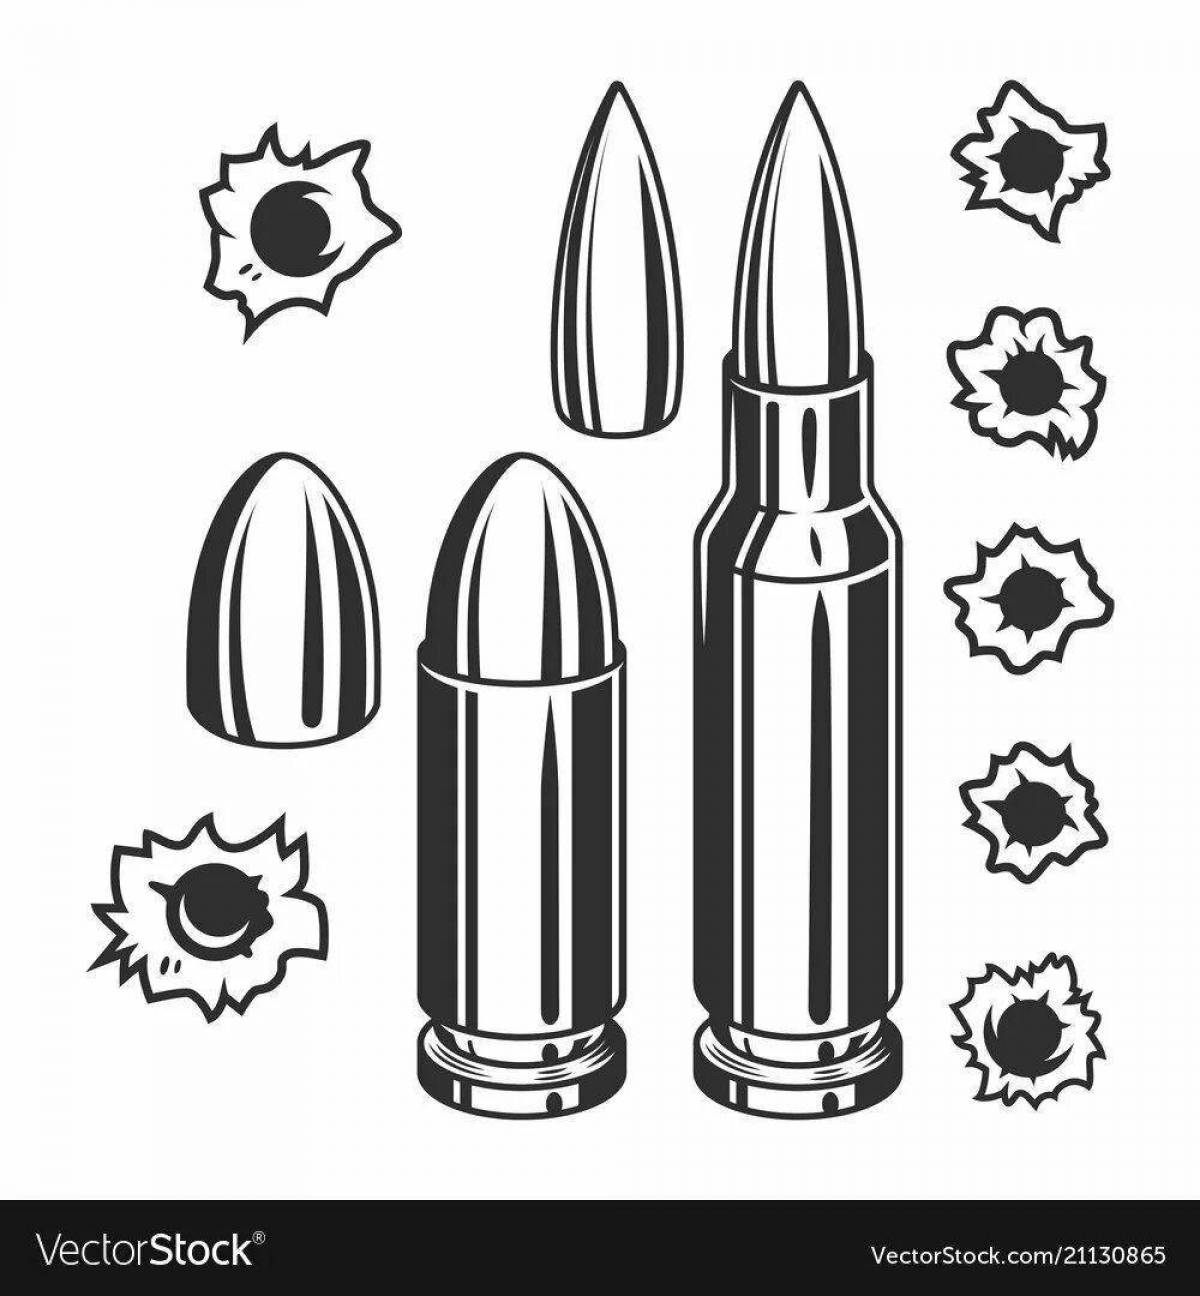 Amazing bullet coloring page